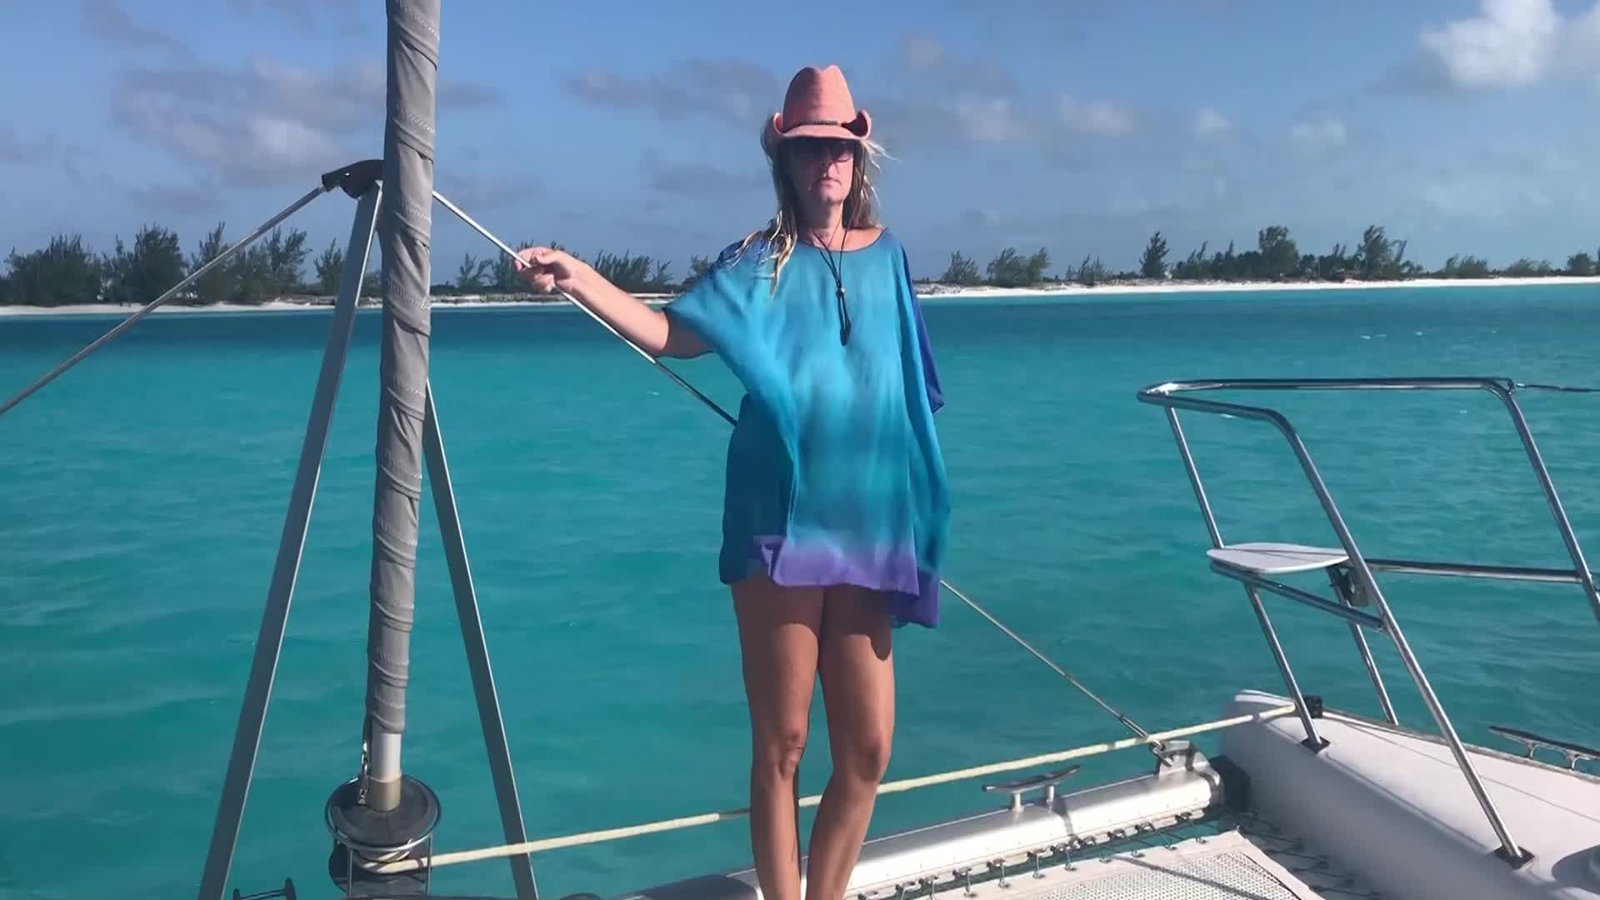 Video post by Sailing Angel